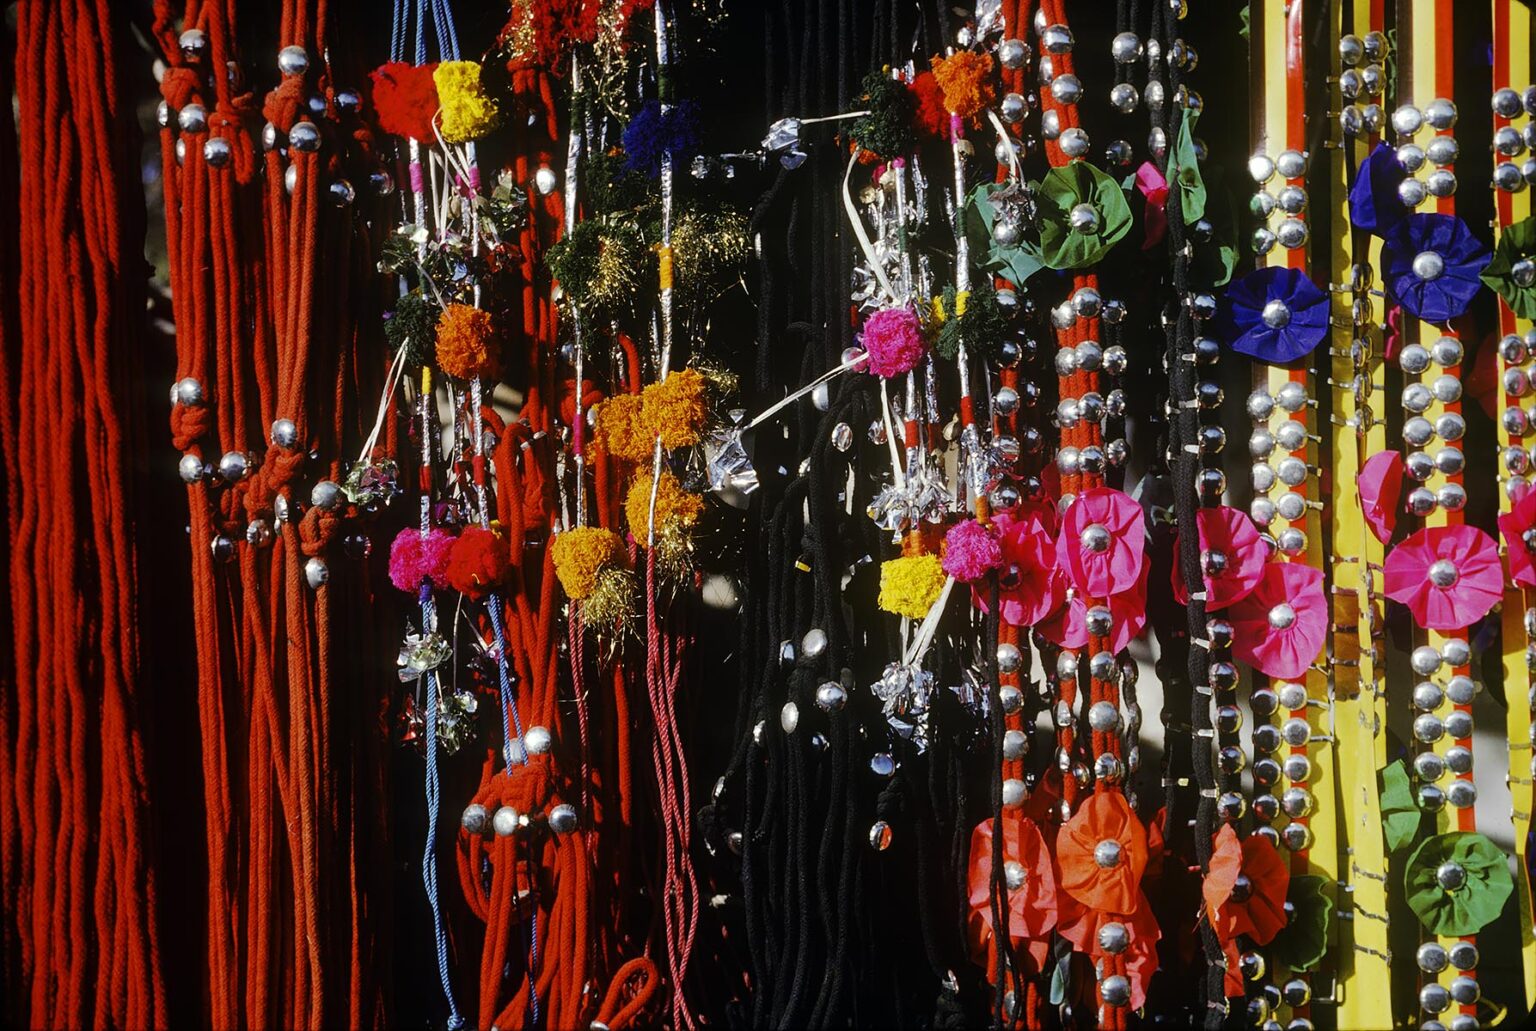 CAMEL HARNESSES and HALTERS with decorative FLOWERS at the PUSHKAR CAMEL FAIR - RAJASTHAN, INDI